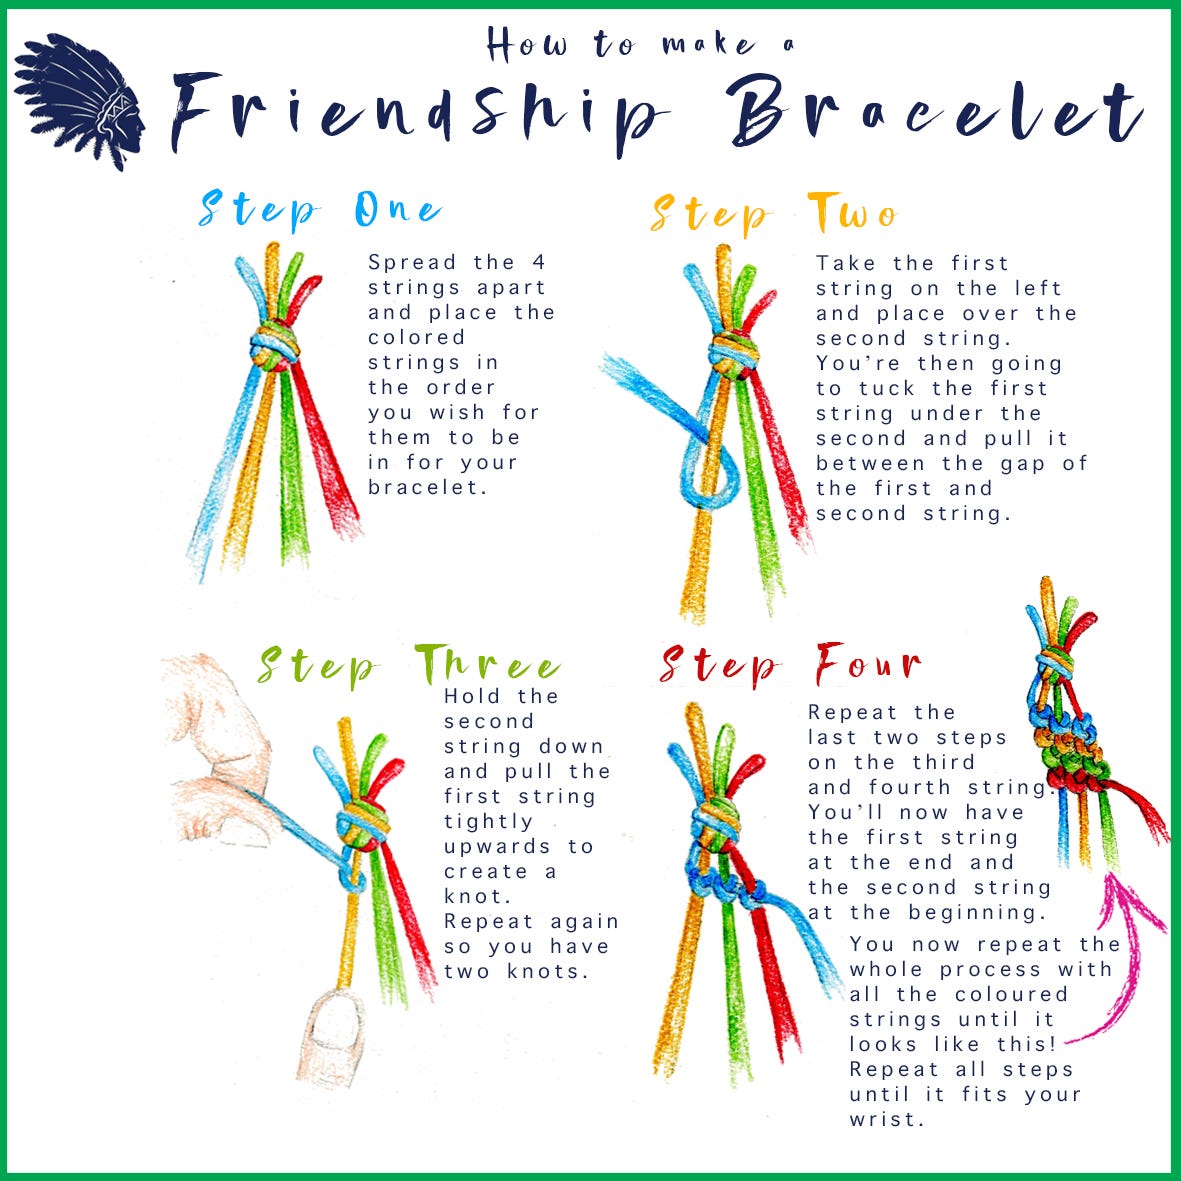 How To Make Friendship Bracelet With 4 Strings